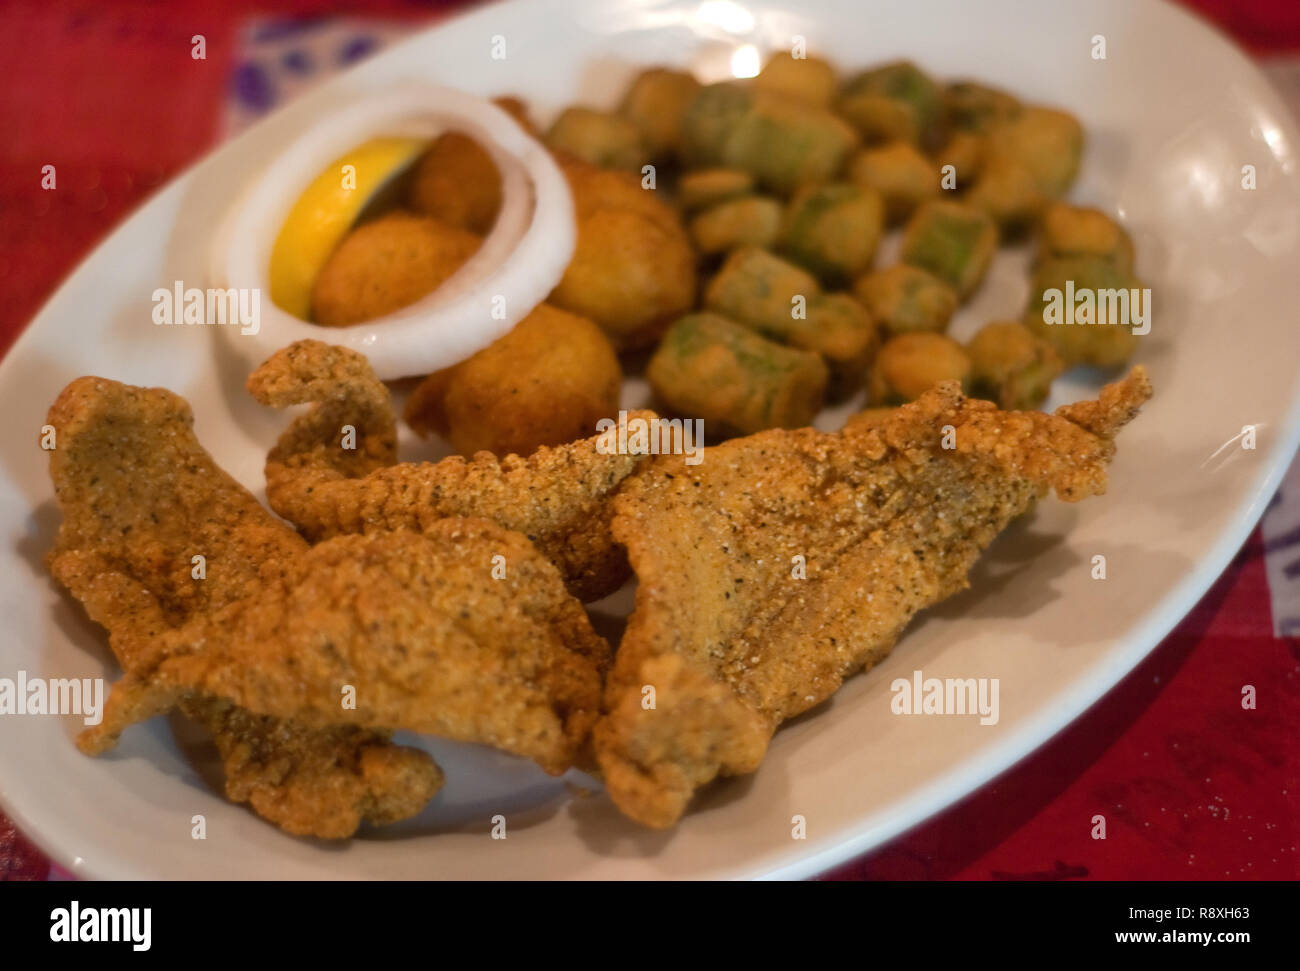 A plate of fried catfish and fried okra is served at Taylor Grocery in Taylor, Mississippi. The restaurant is famous for its catfsh. Stock Photo